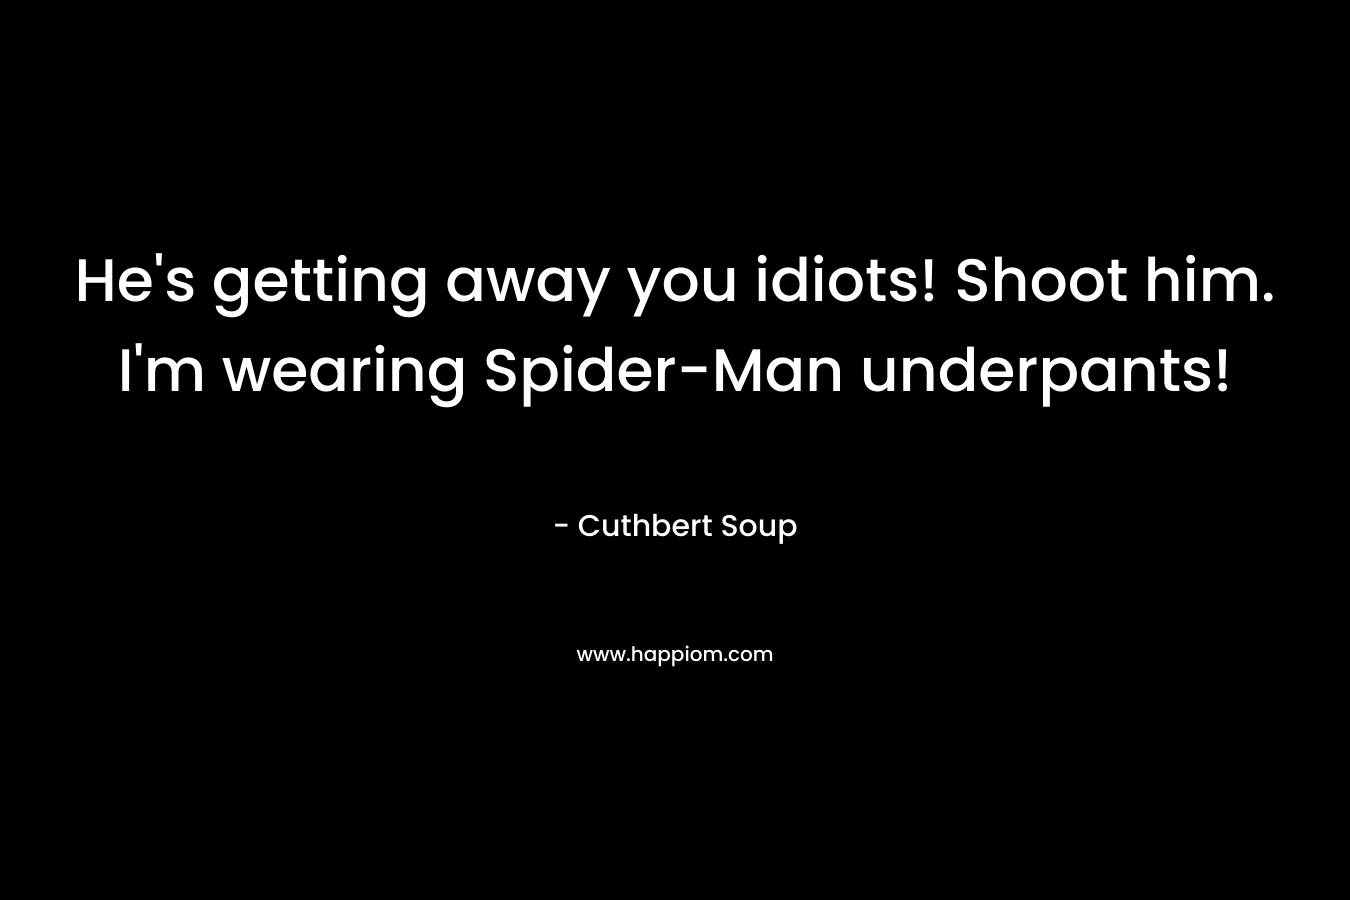 He's getting away you idiots! Shoot him. I'm wearing Spider-Man underpants!